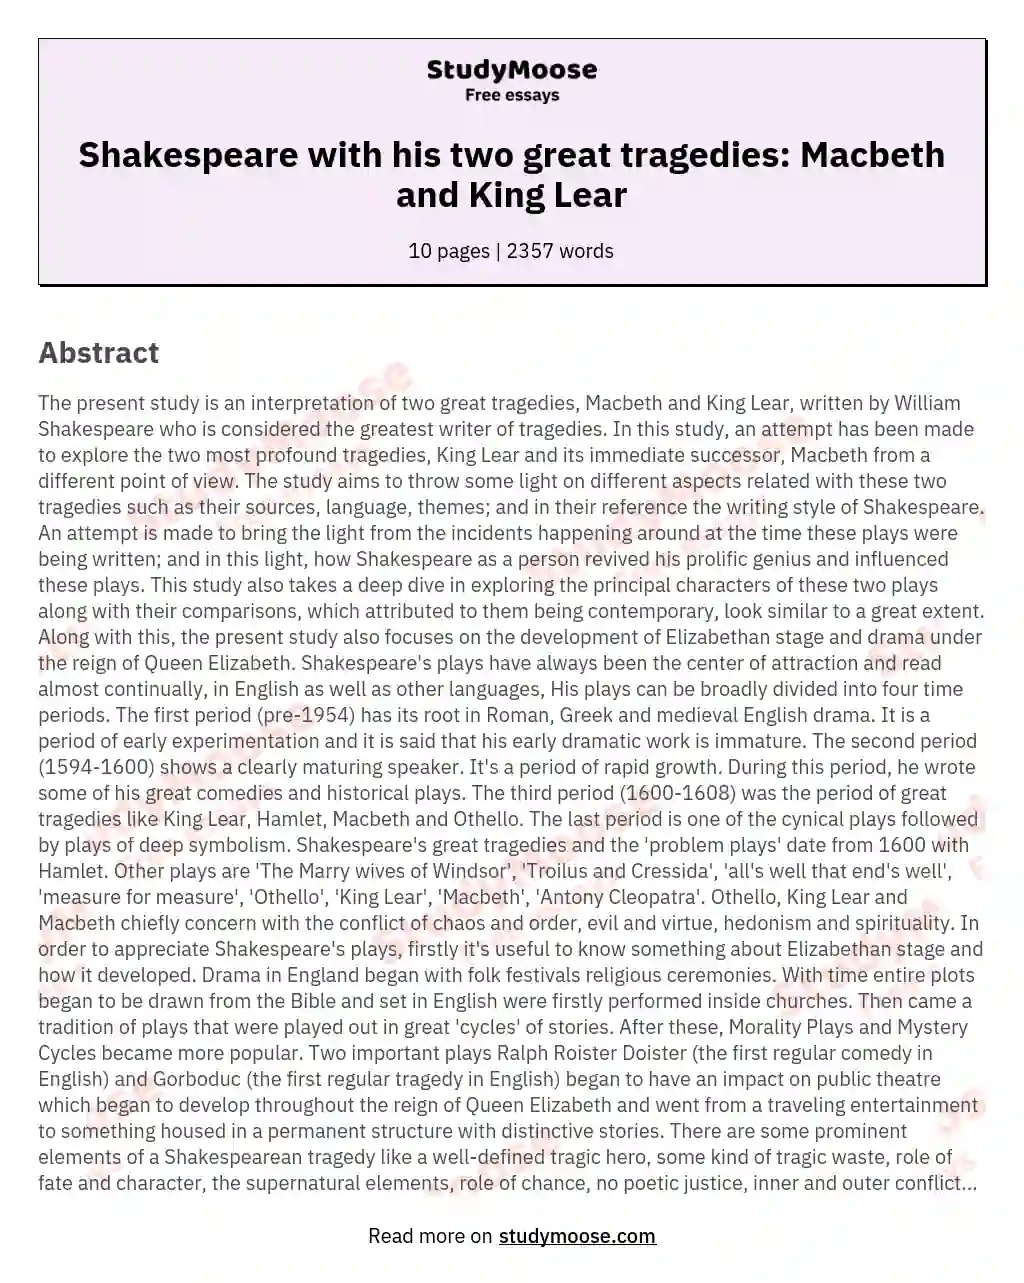 Shakespeare with his two great tragedies: Macbeth and King Lear